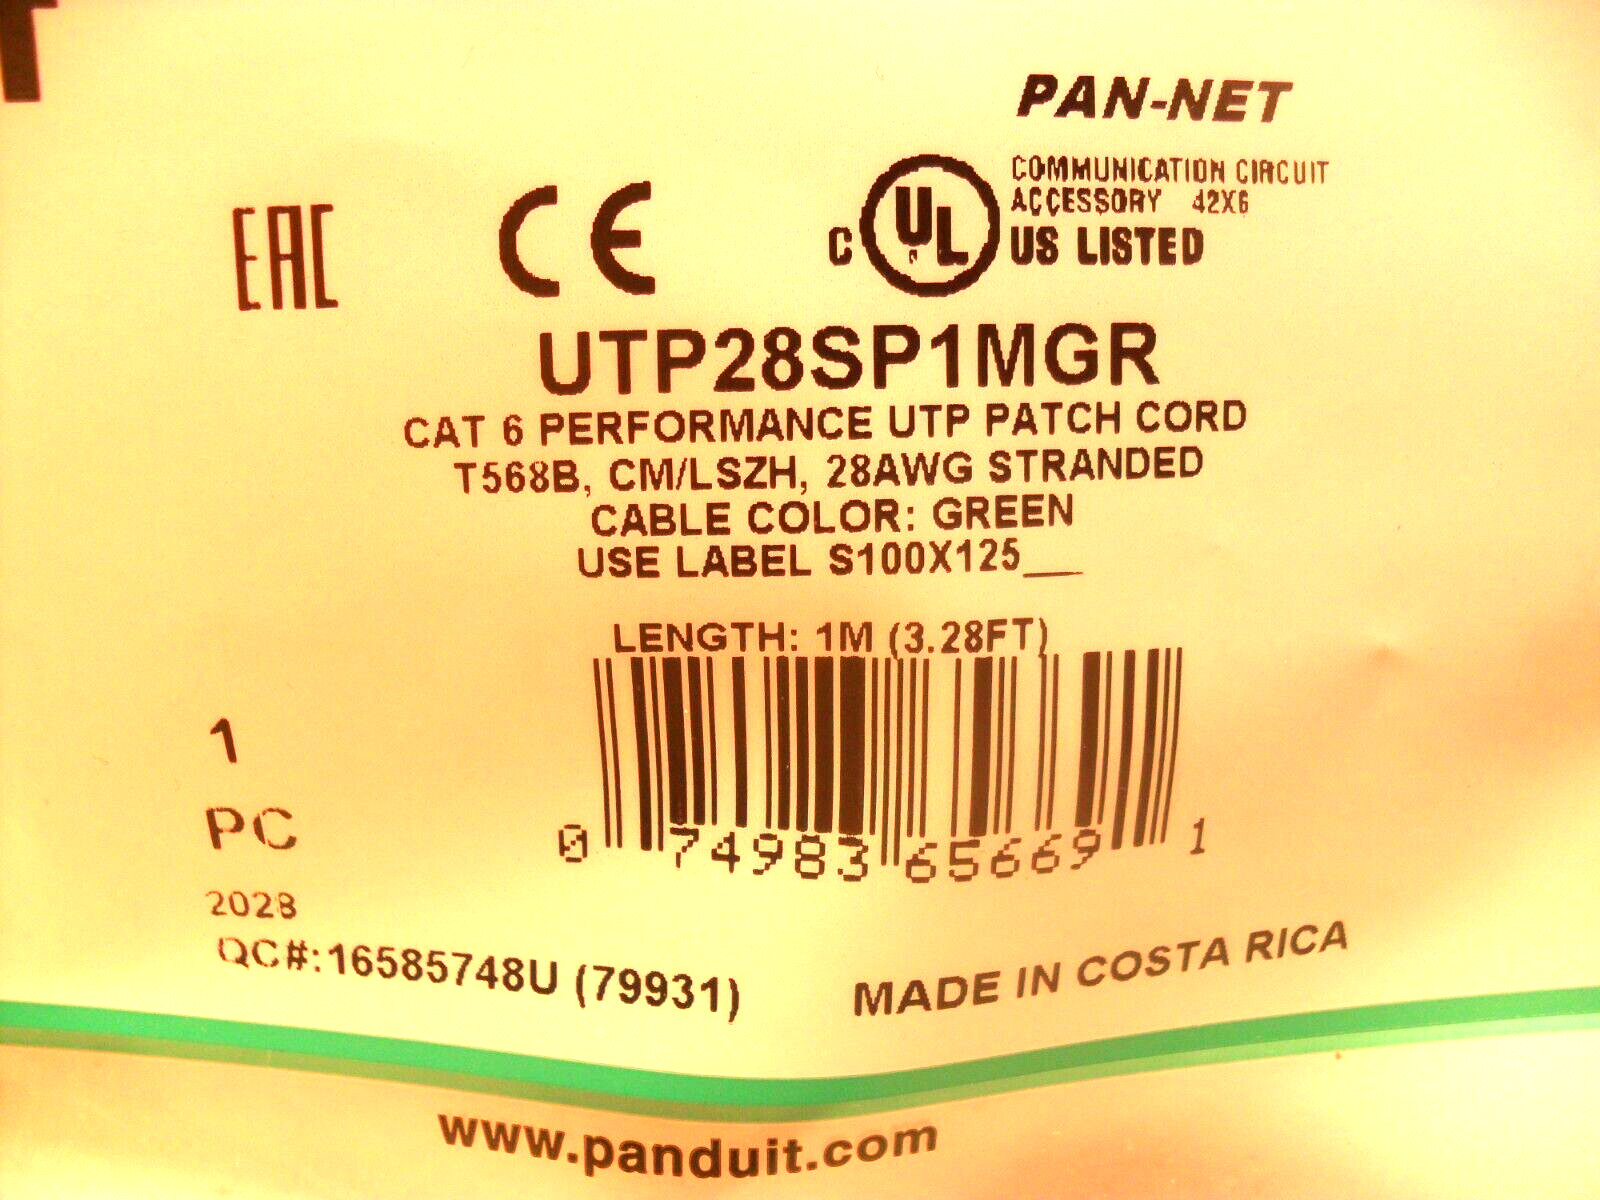 Panduit UTP28SP1MGR Ethernet Cables / Networking Cables Sealed Factory